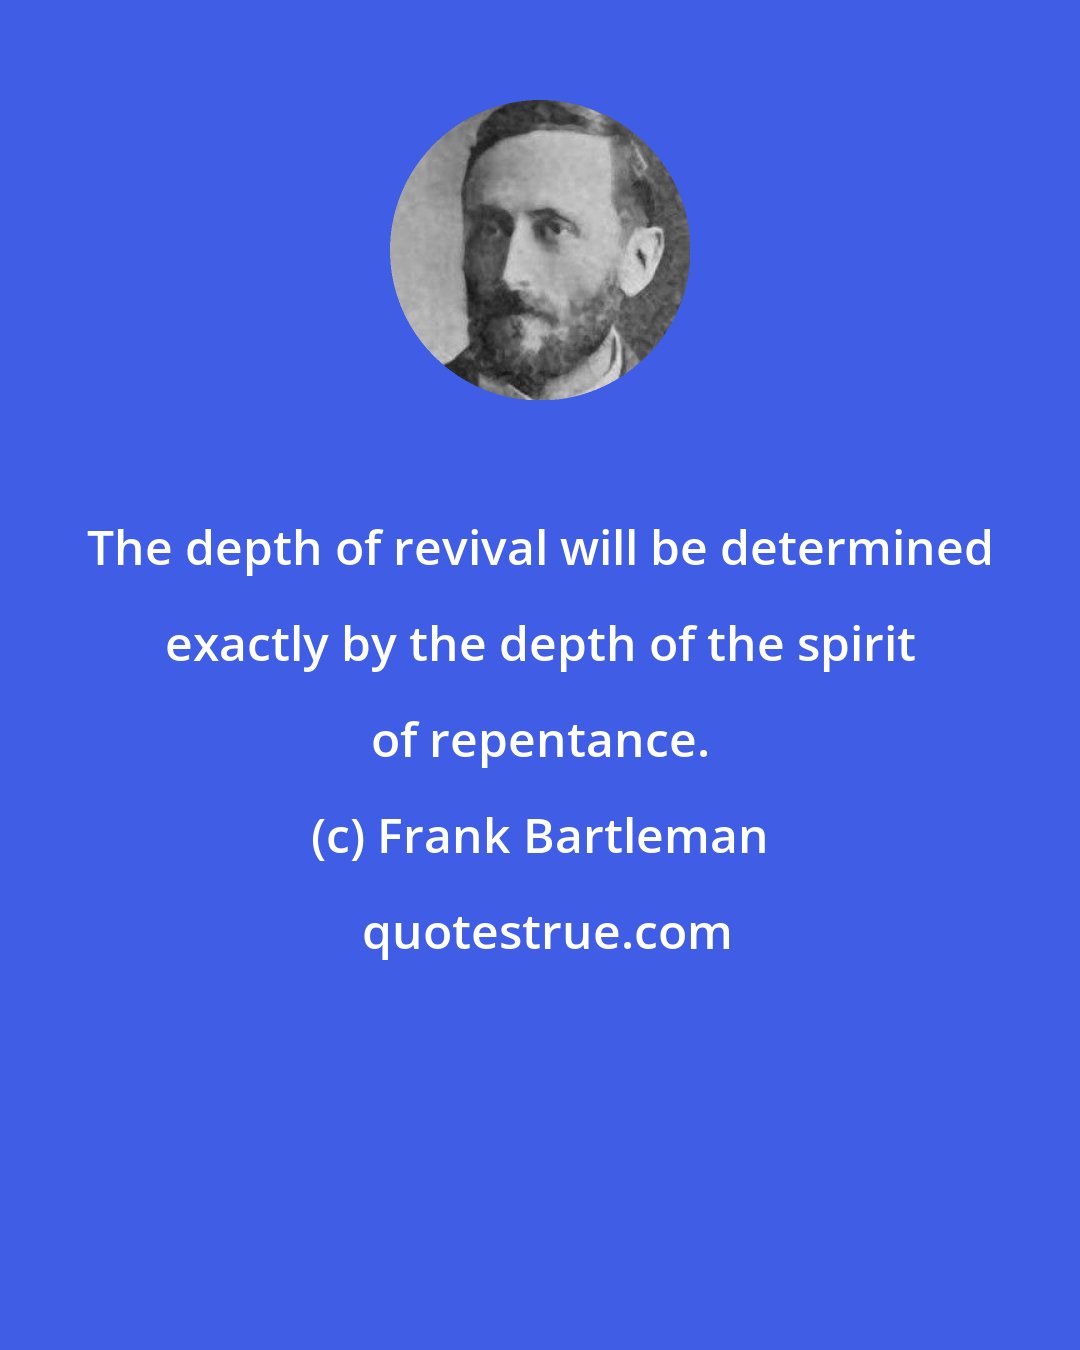 Frank Bartleman: The depth of revival will be determined exactly by the depth of the spirit of repentance.